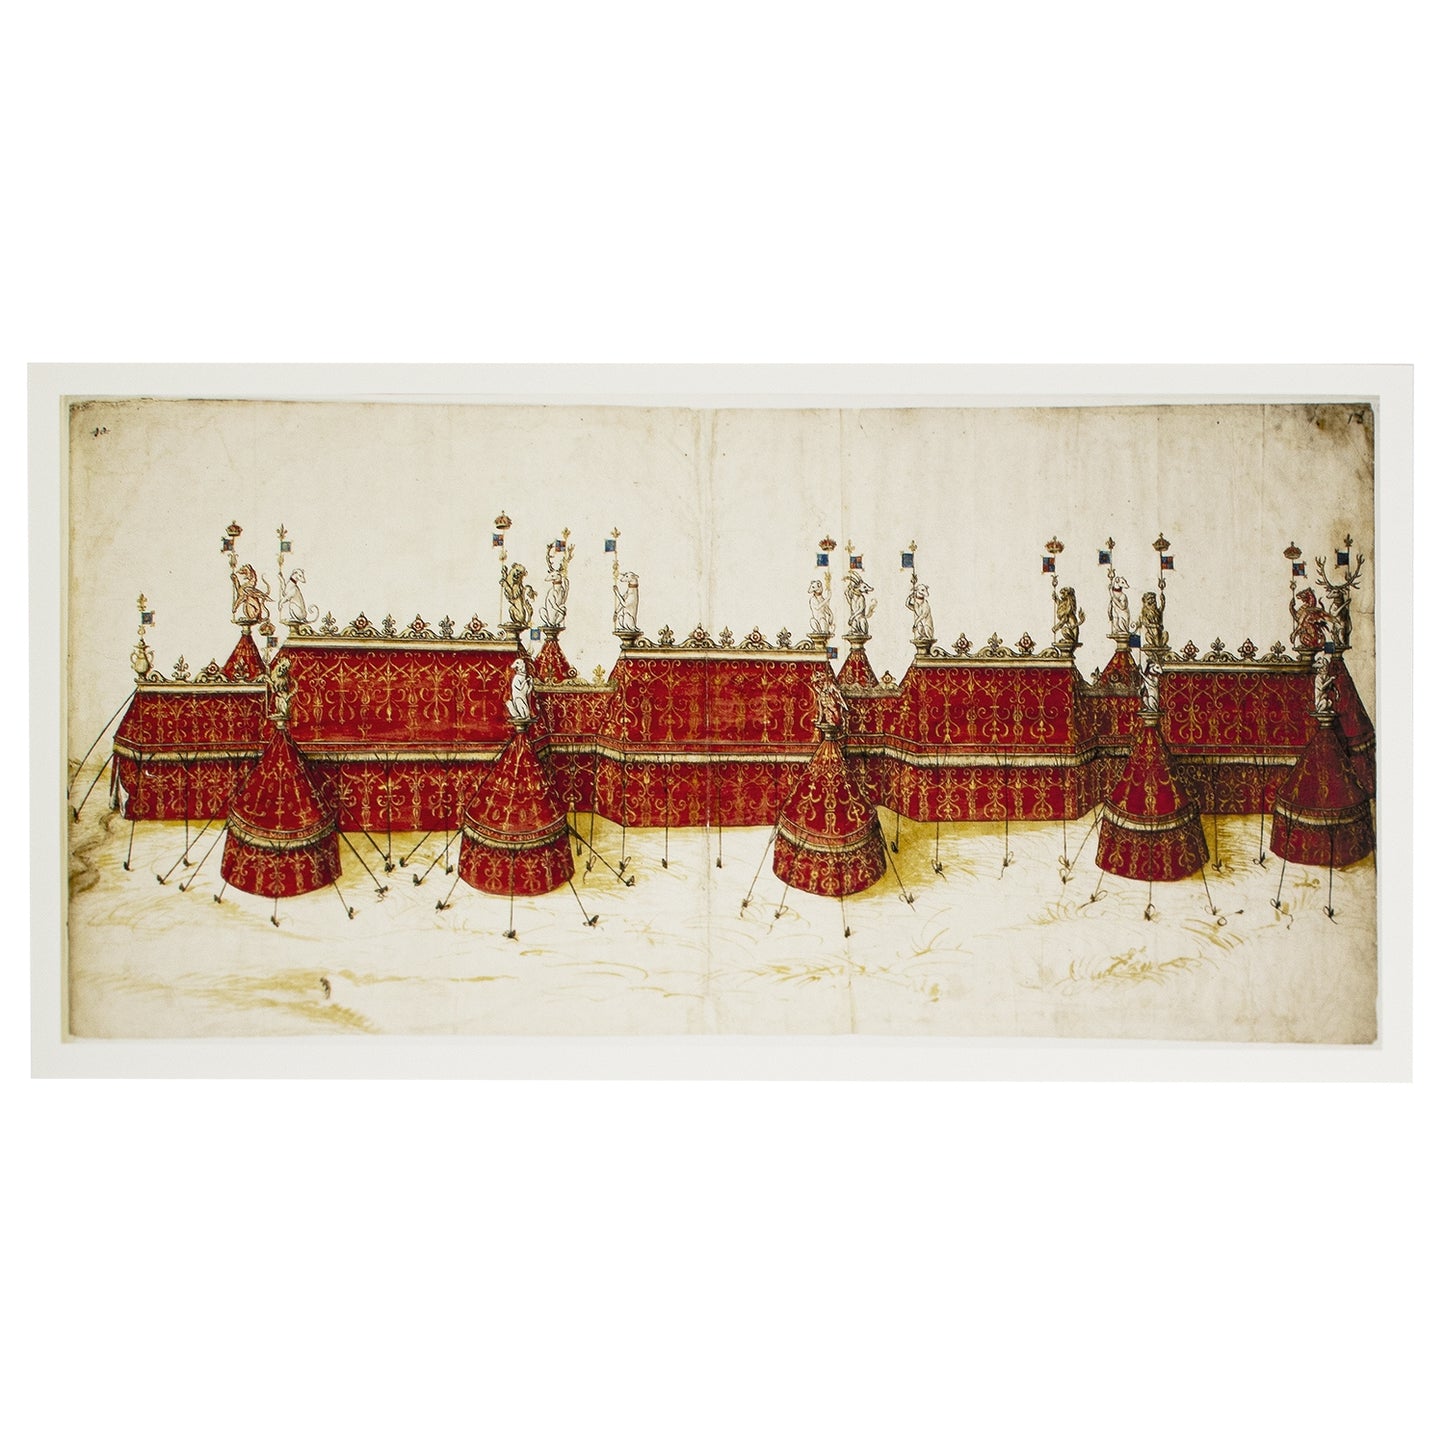 Design for a royal pavilion in crimson and gold